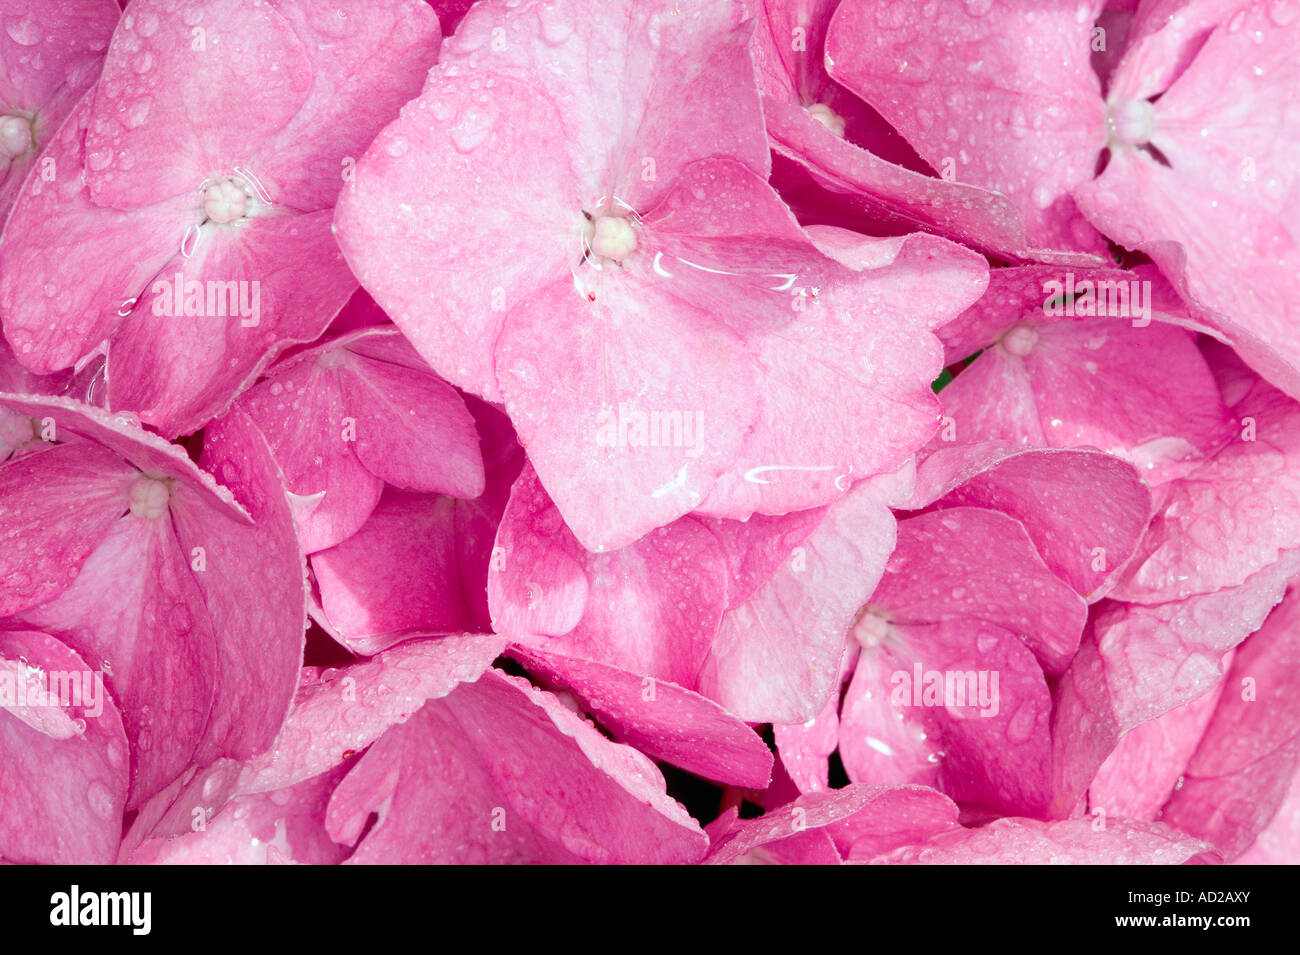 Frame filled with wet pink Hydrangia petals Stock Photo